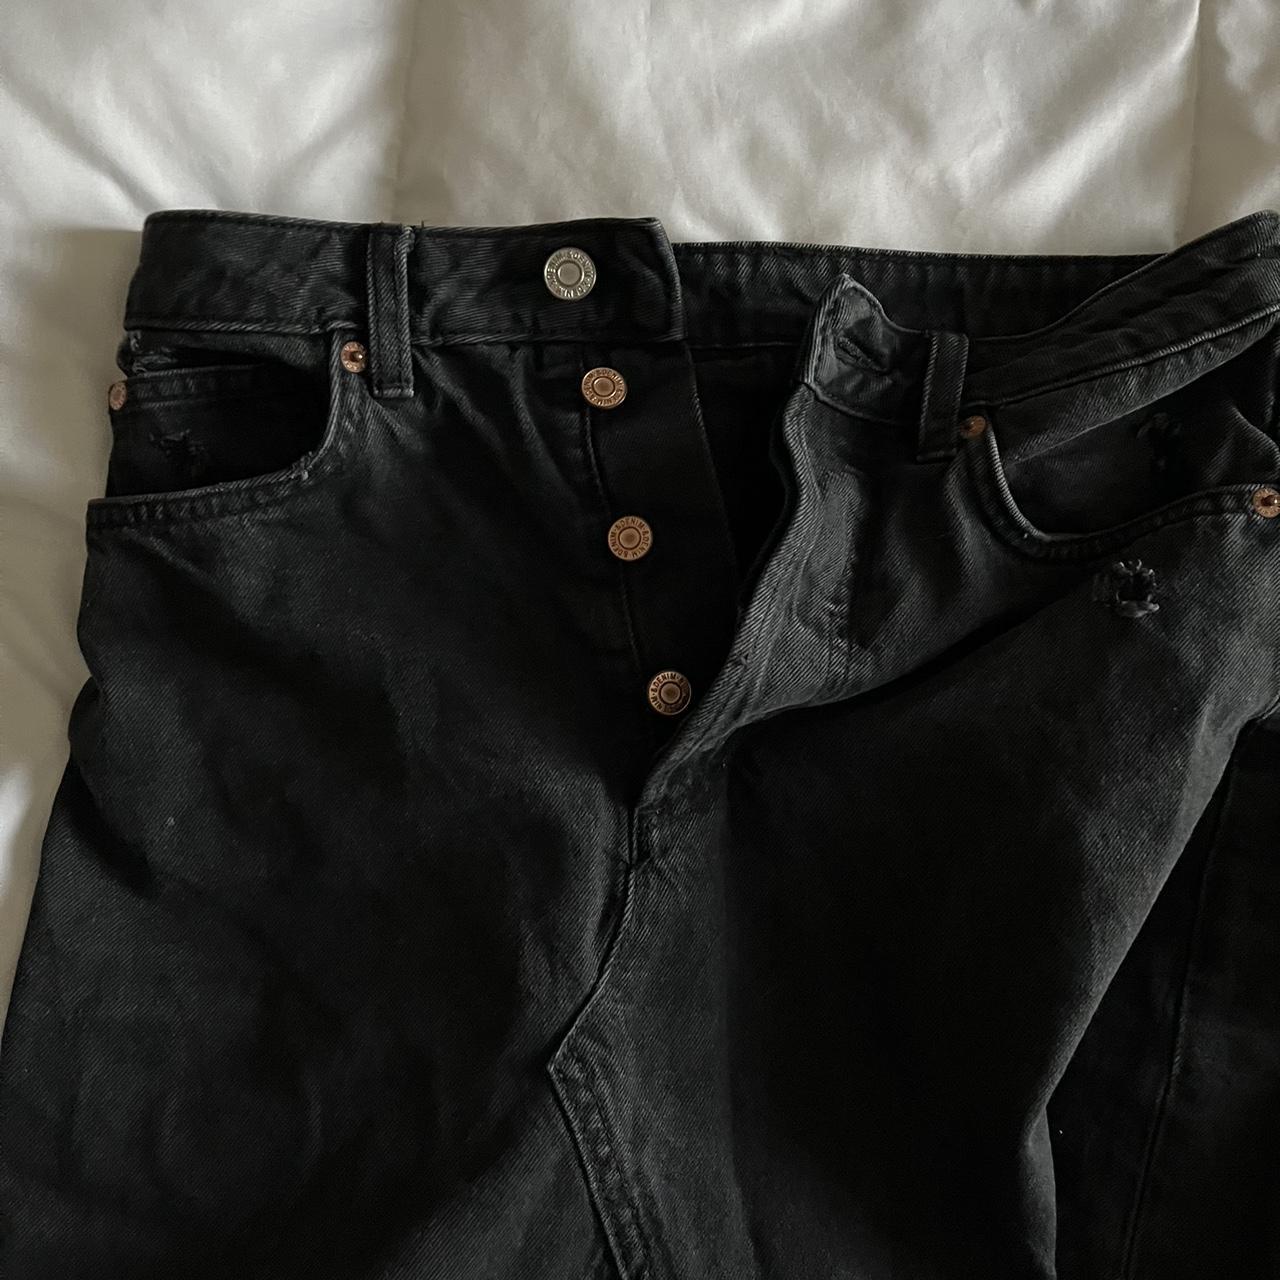 Black denim skirt! Buttons up the front are fun and... - Depop